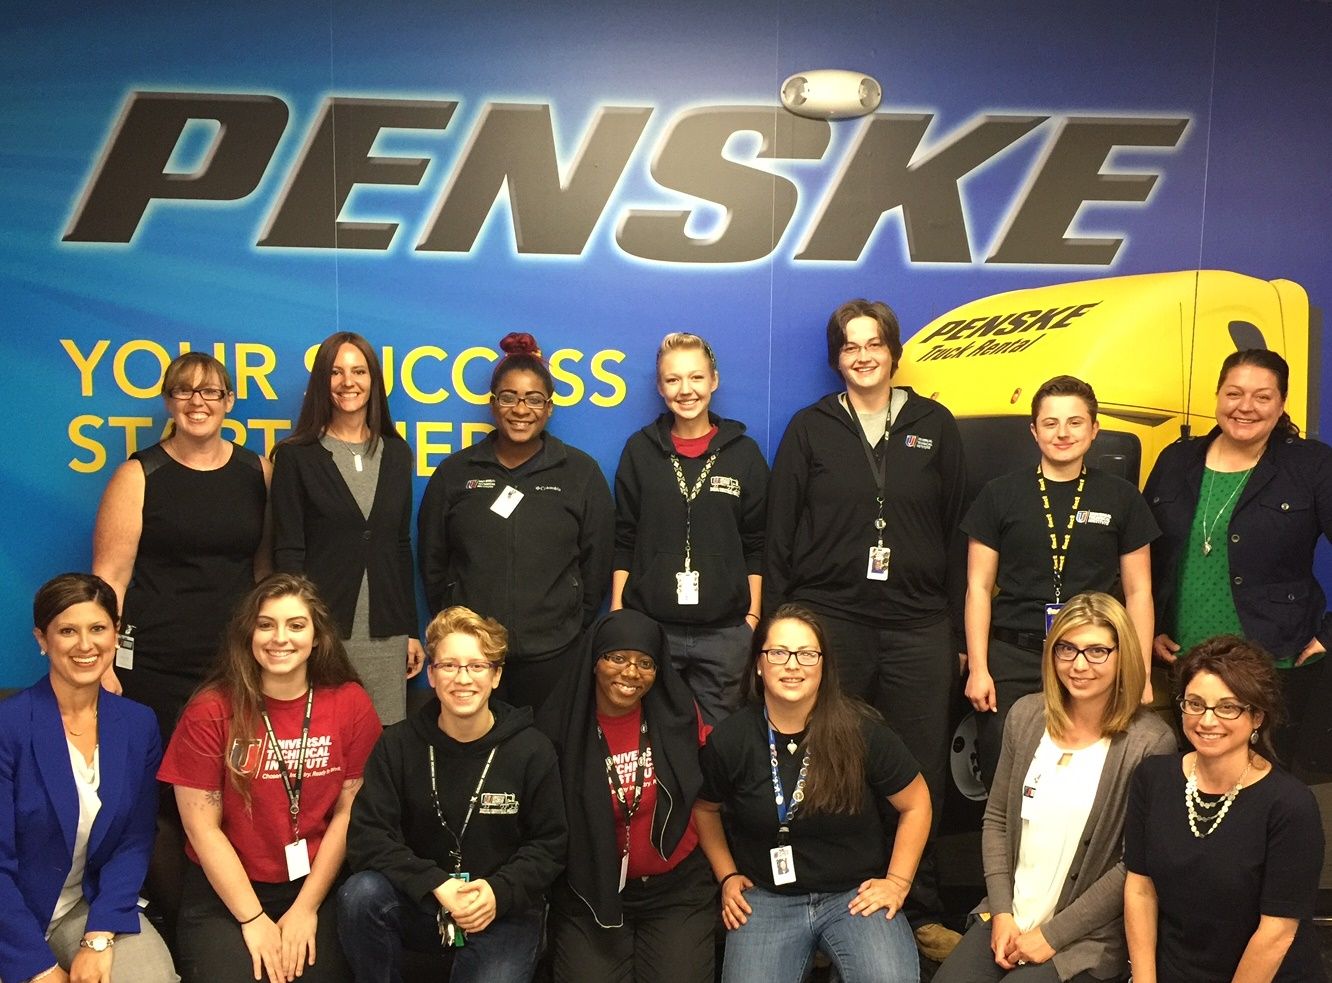 Penske Truck Leasing Encourages Female Truck Technicians to Enter Industry at UTI Exton Event